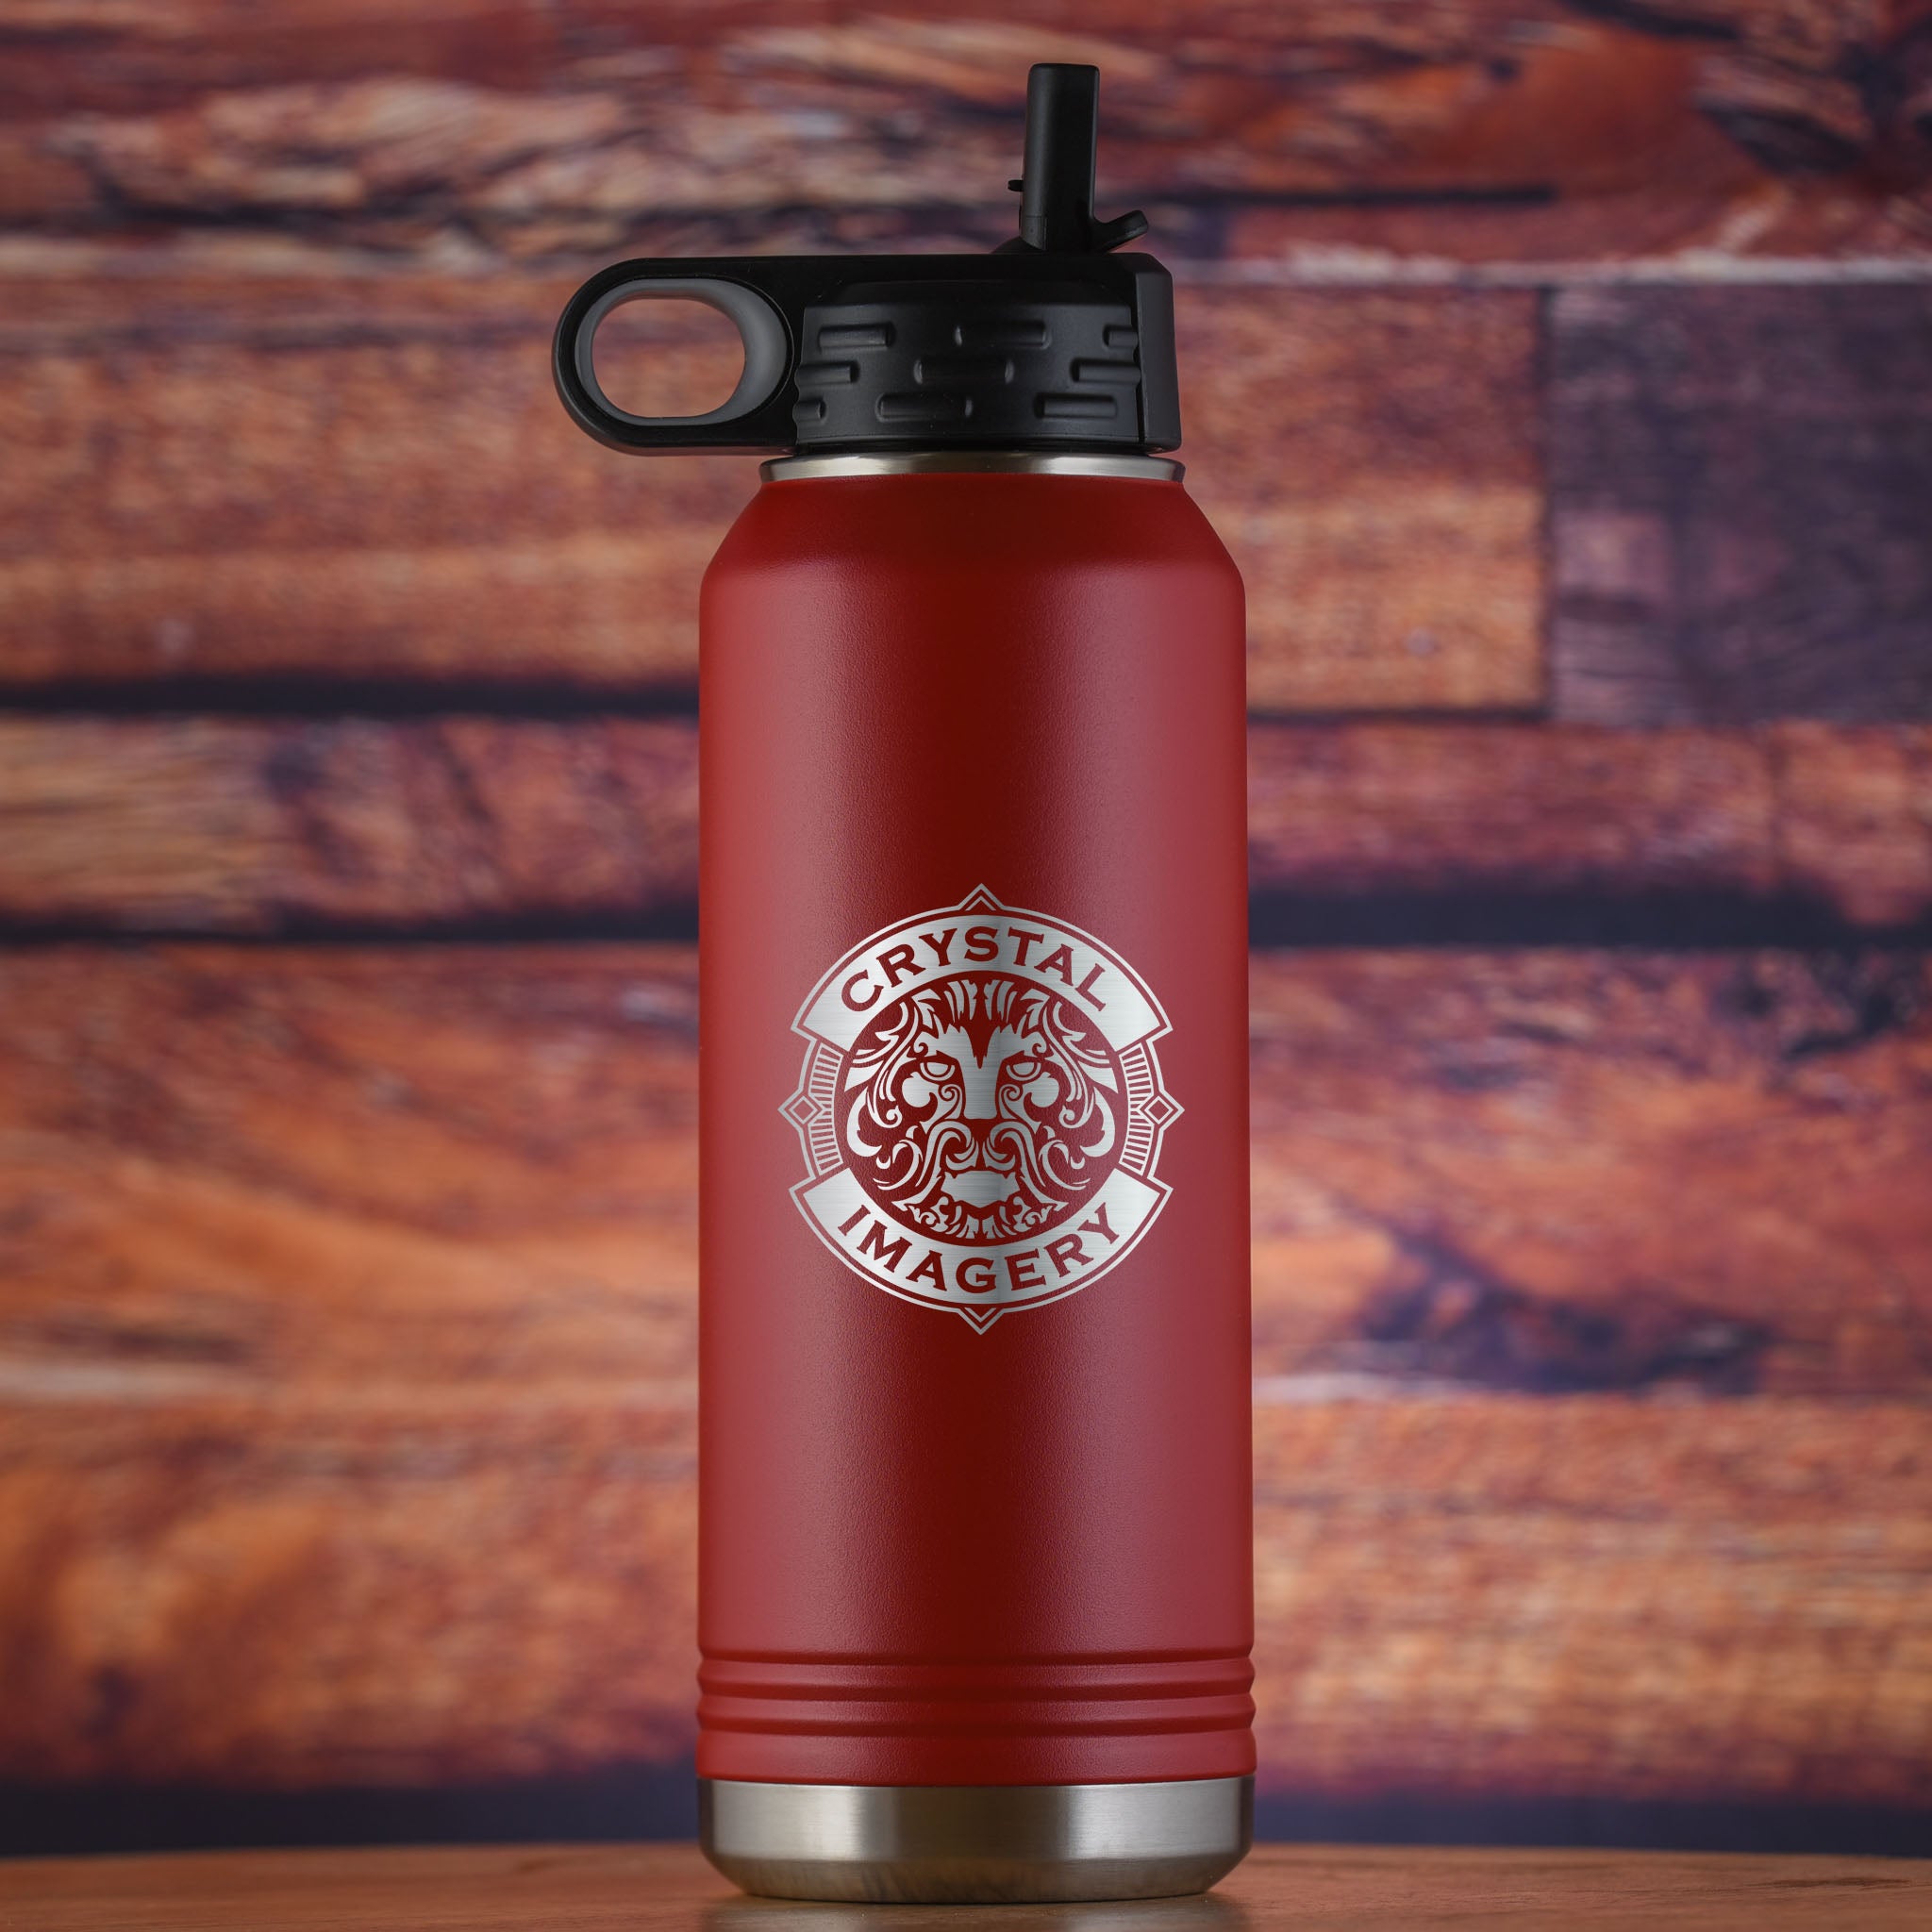 https://cdn.shopify.com/s/files/1/0001/8264/8896/products/Logo_WaterBottle_Red.jpg?v=1679493715